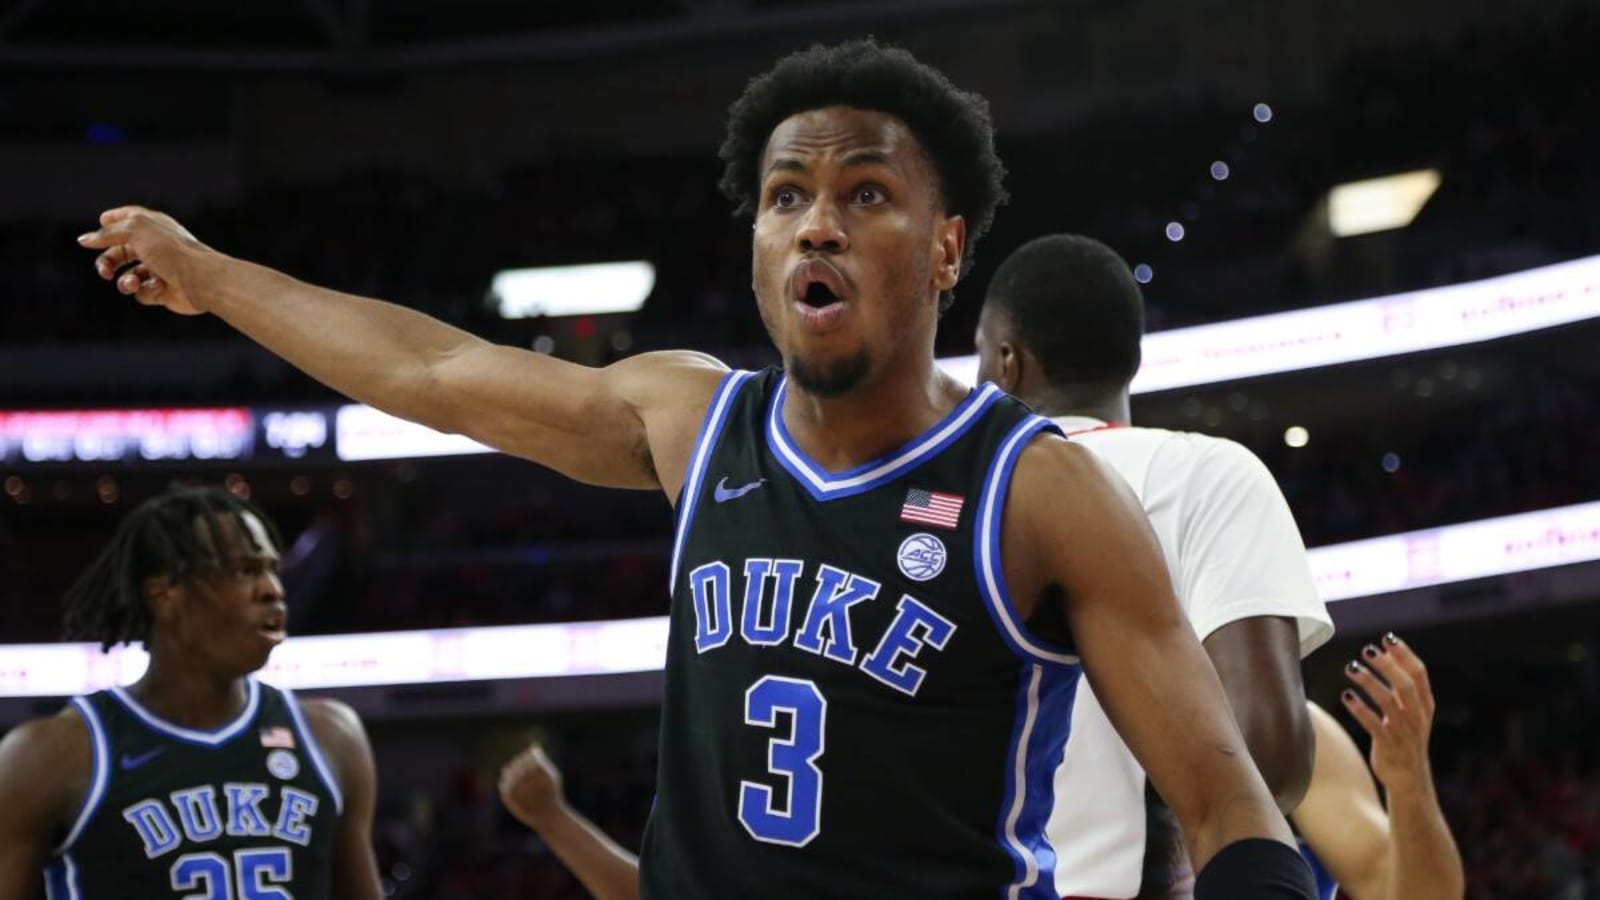 College basketball pick and prediction for NC State vs. Duke for Thursday, March 14